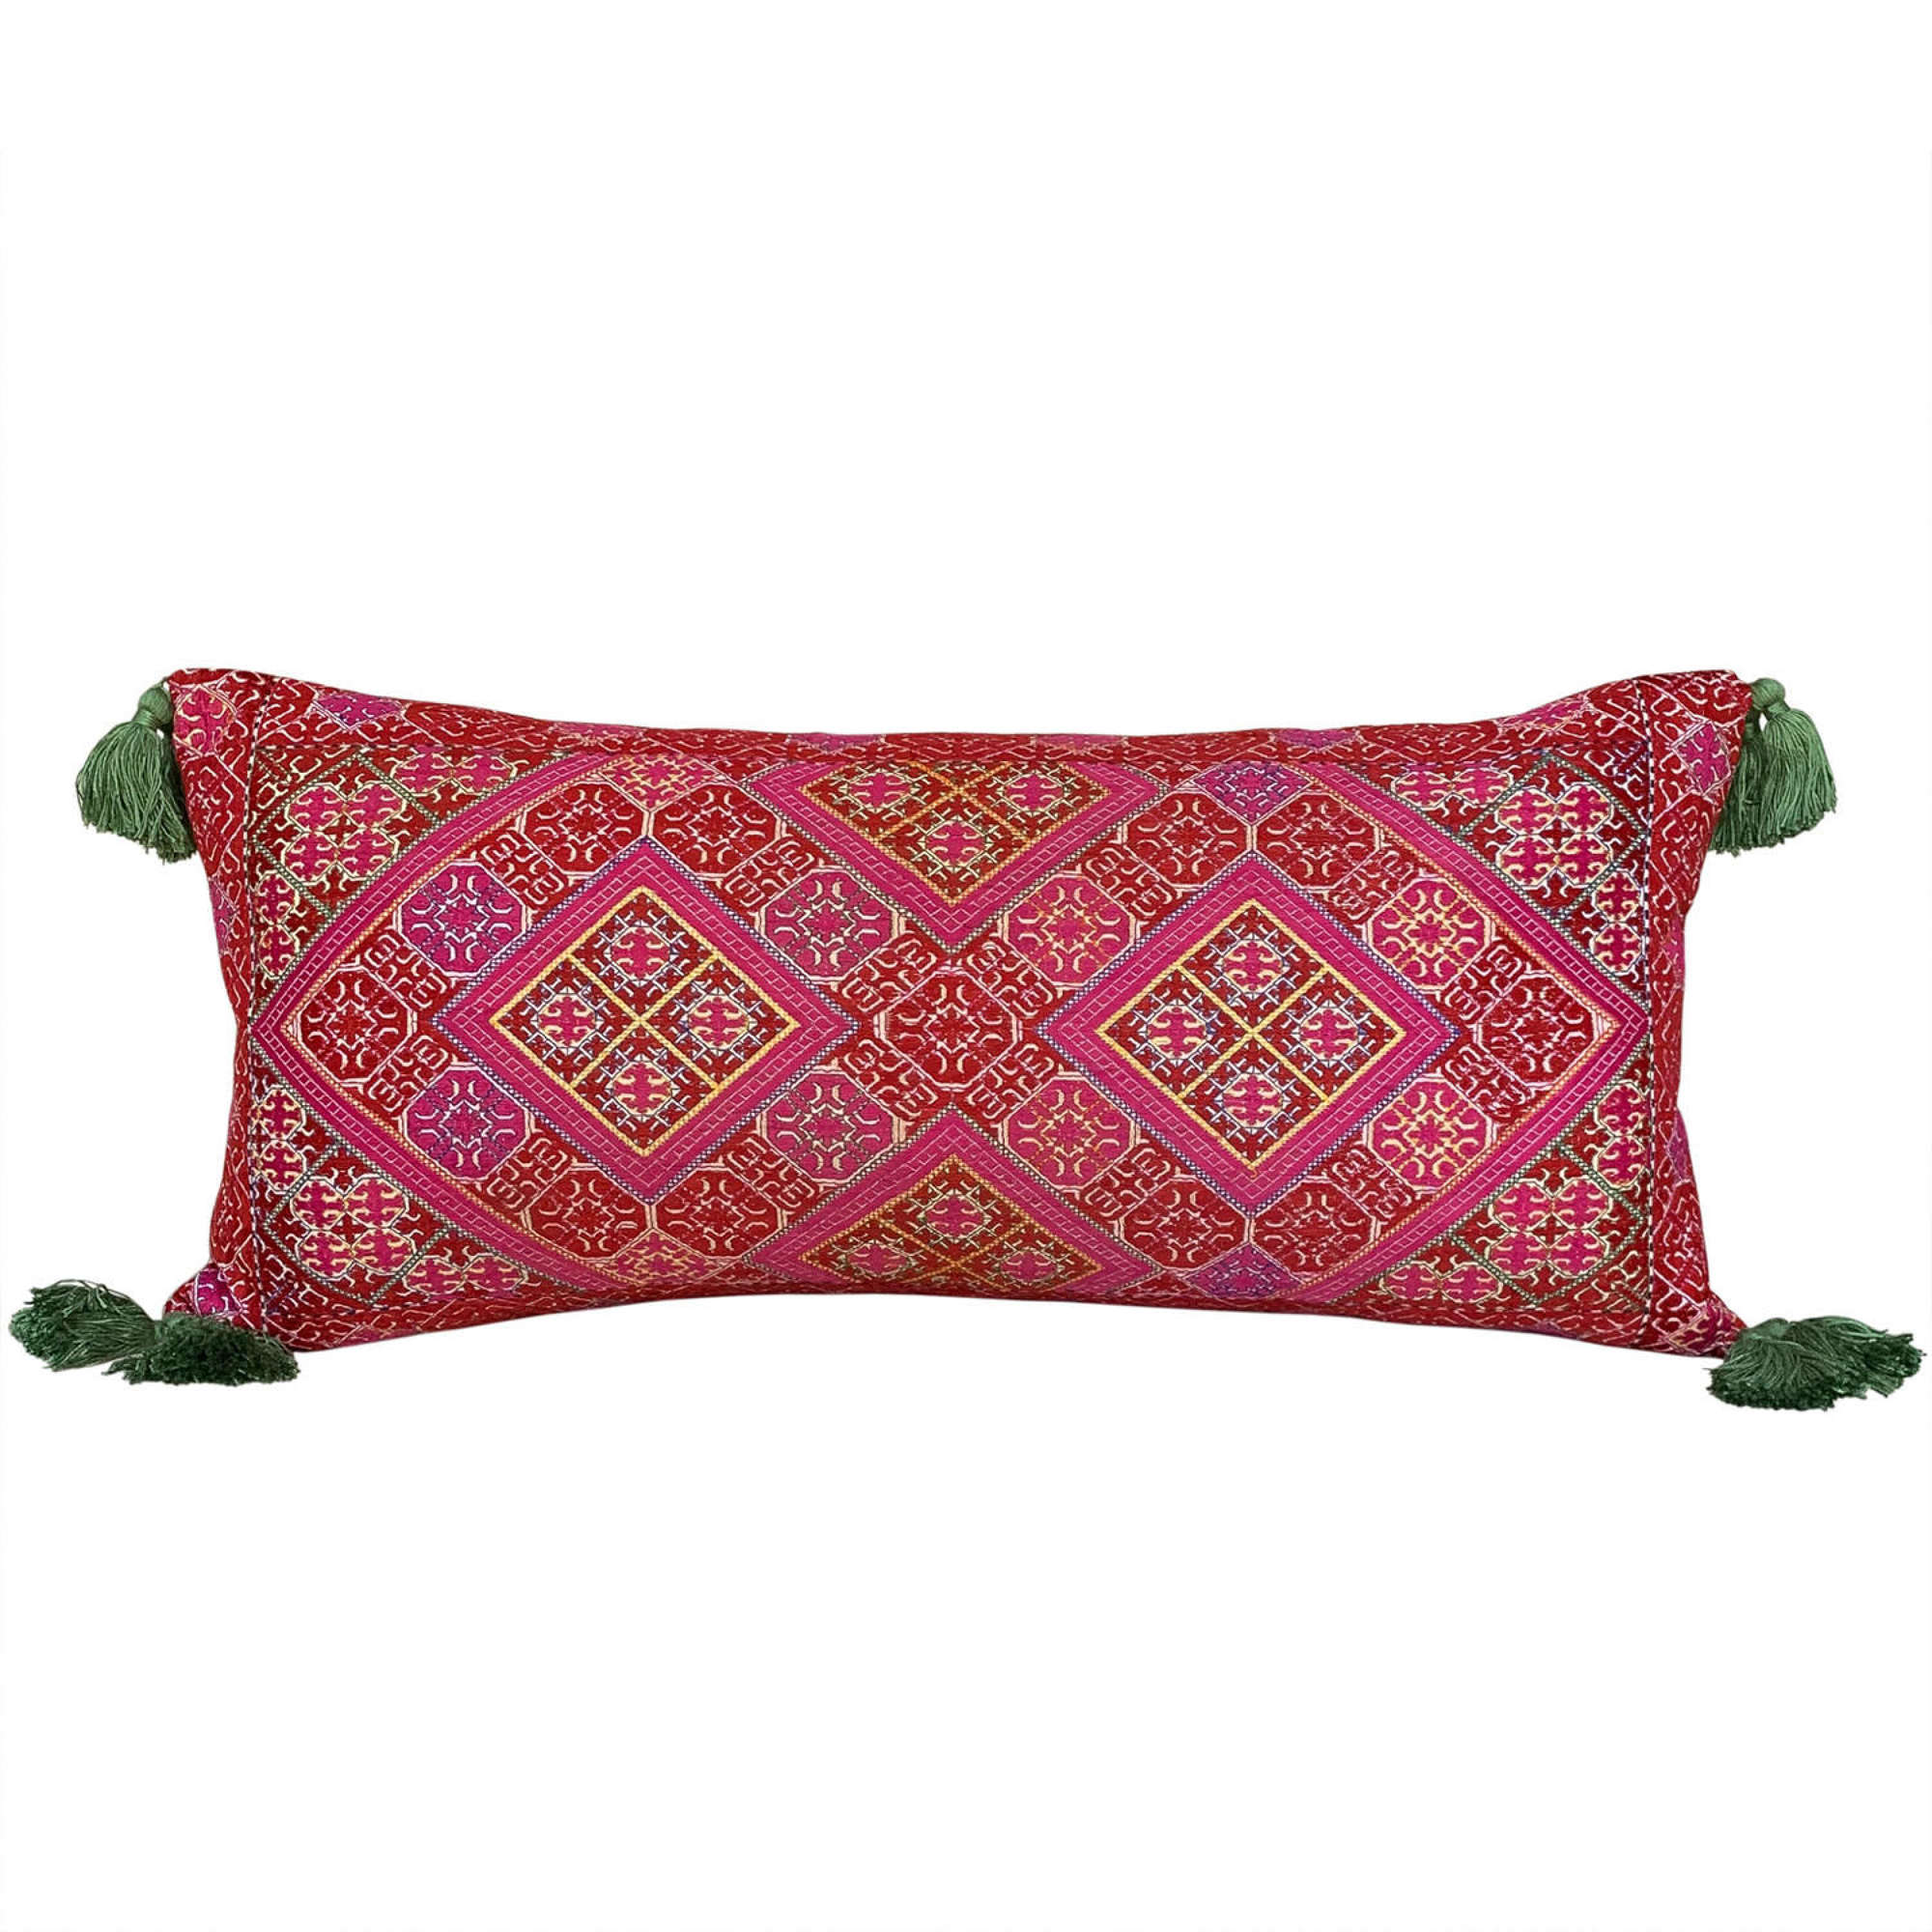 Swat Valley cushion with green tassels